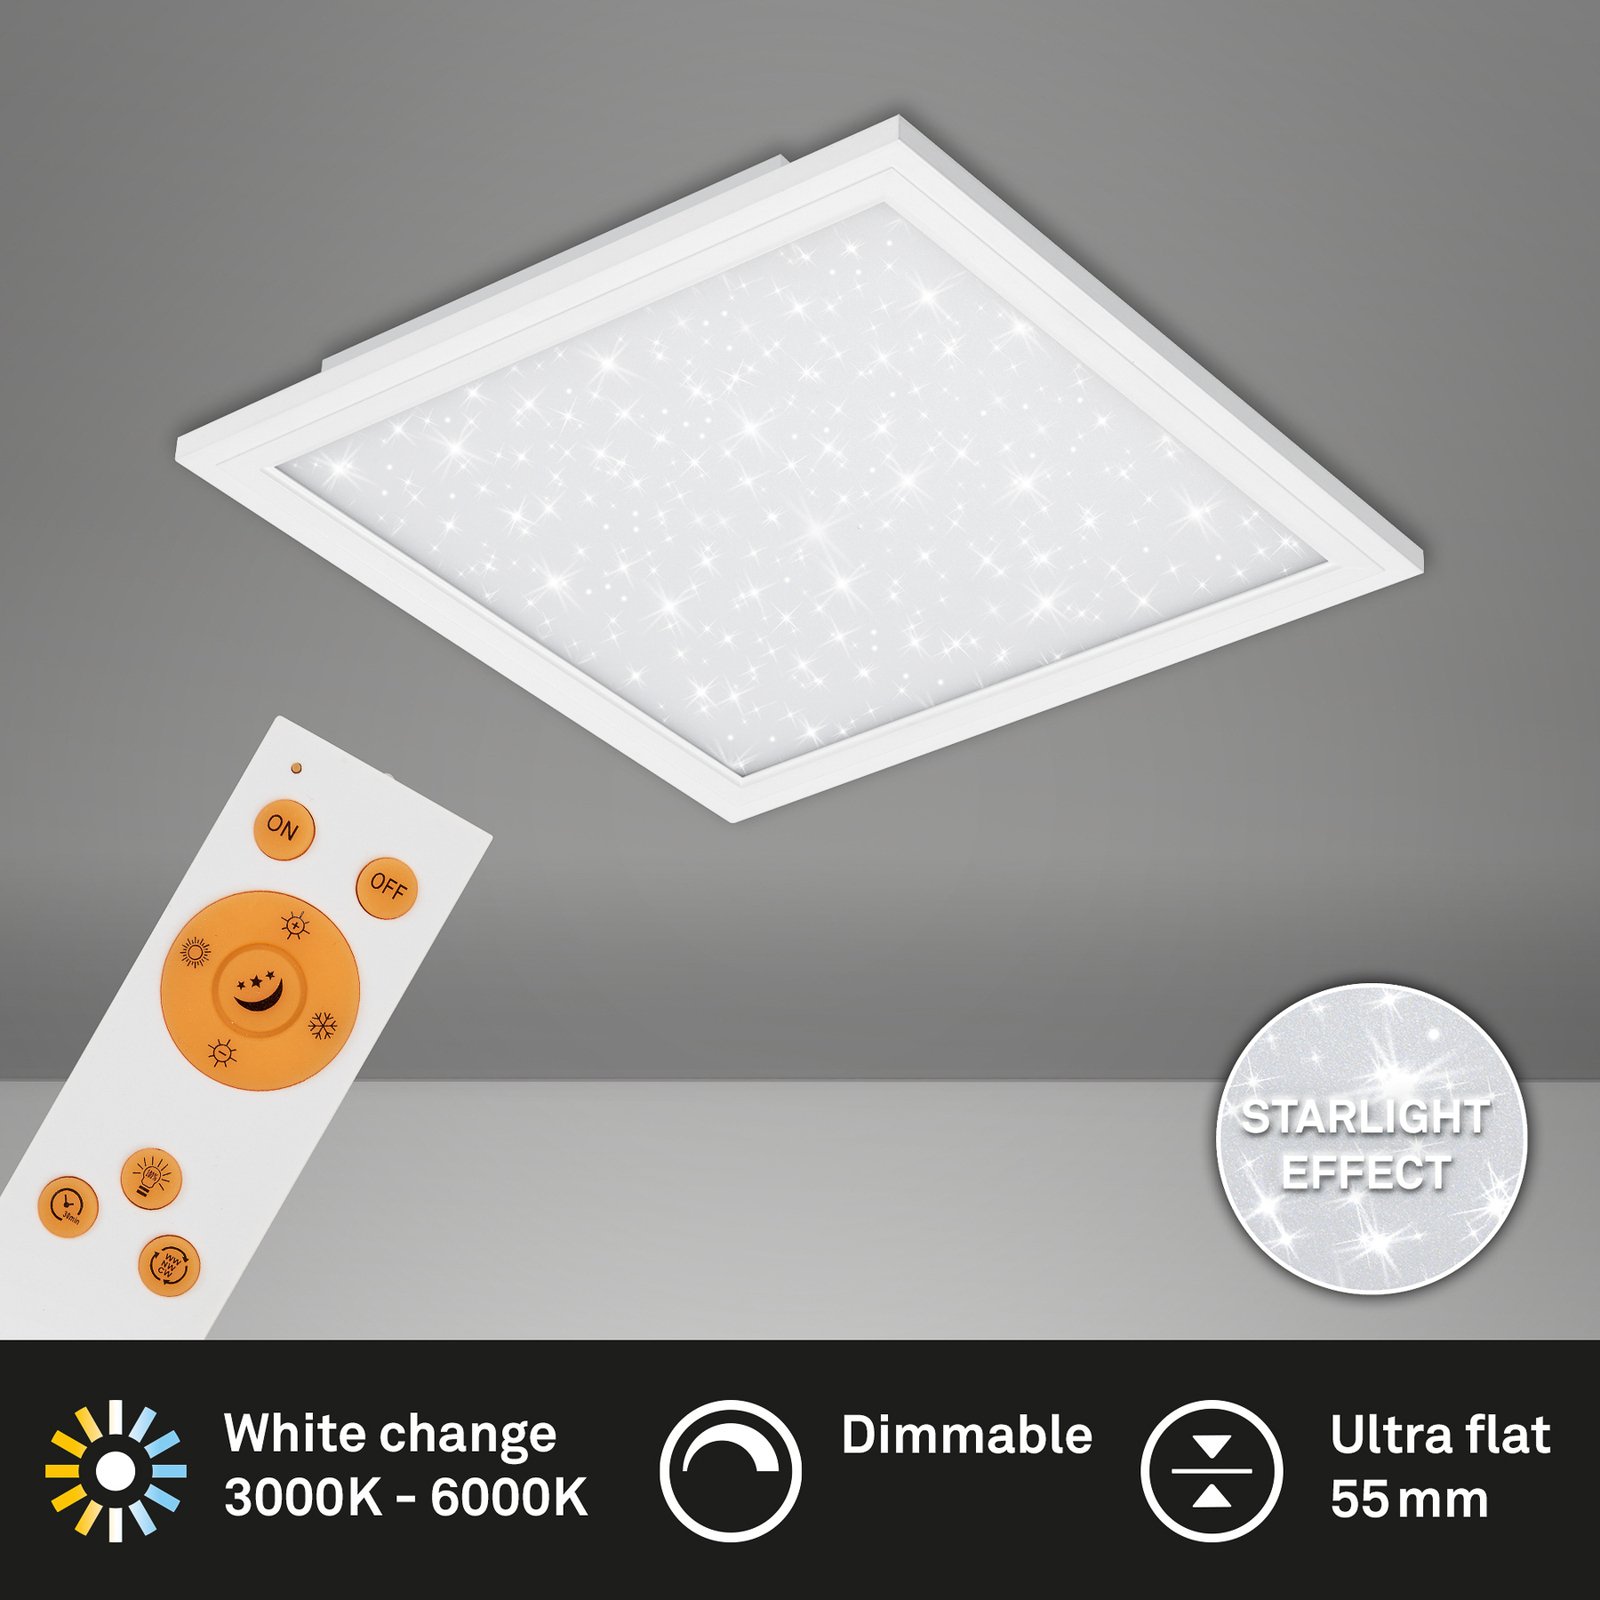 LED panel Pallas, white, dimmable, CCT, 29.5x29.5cm